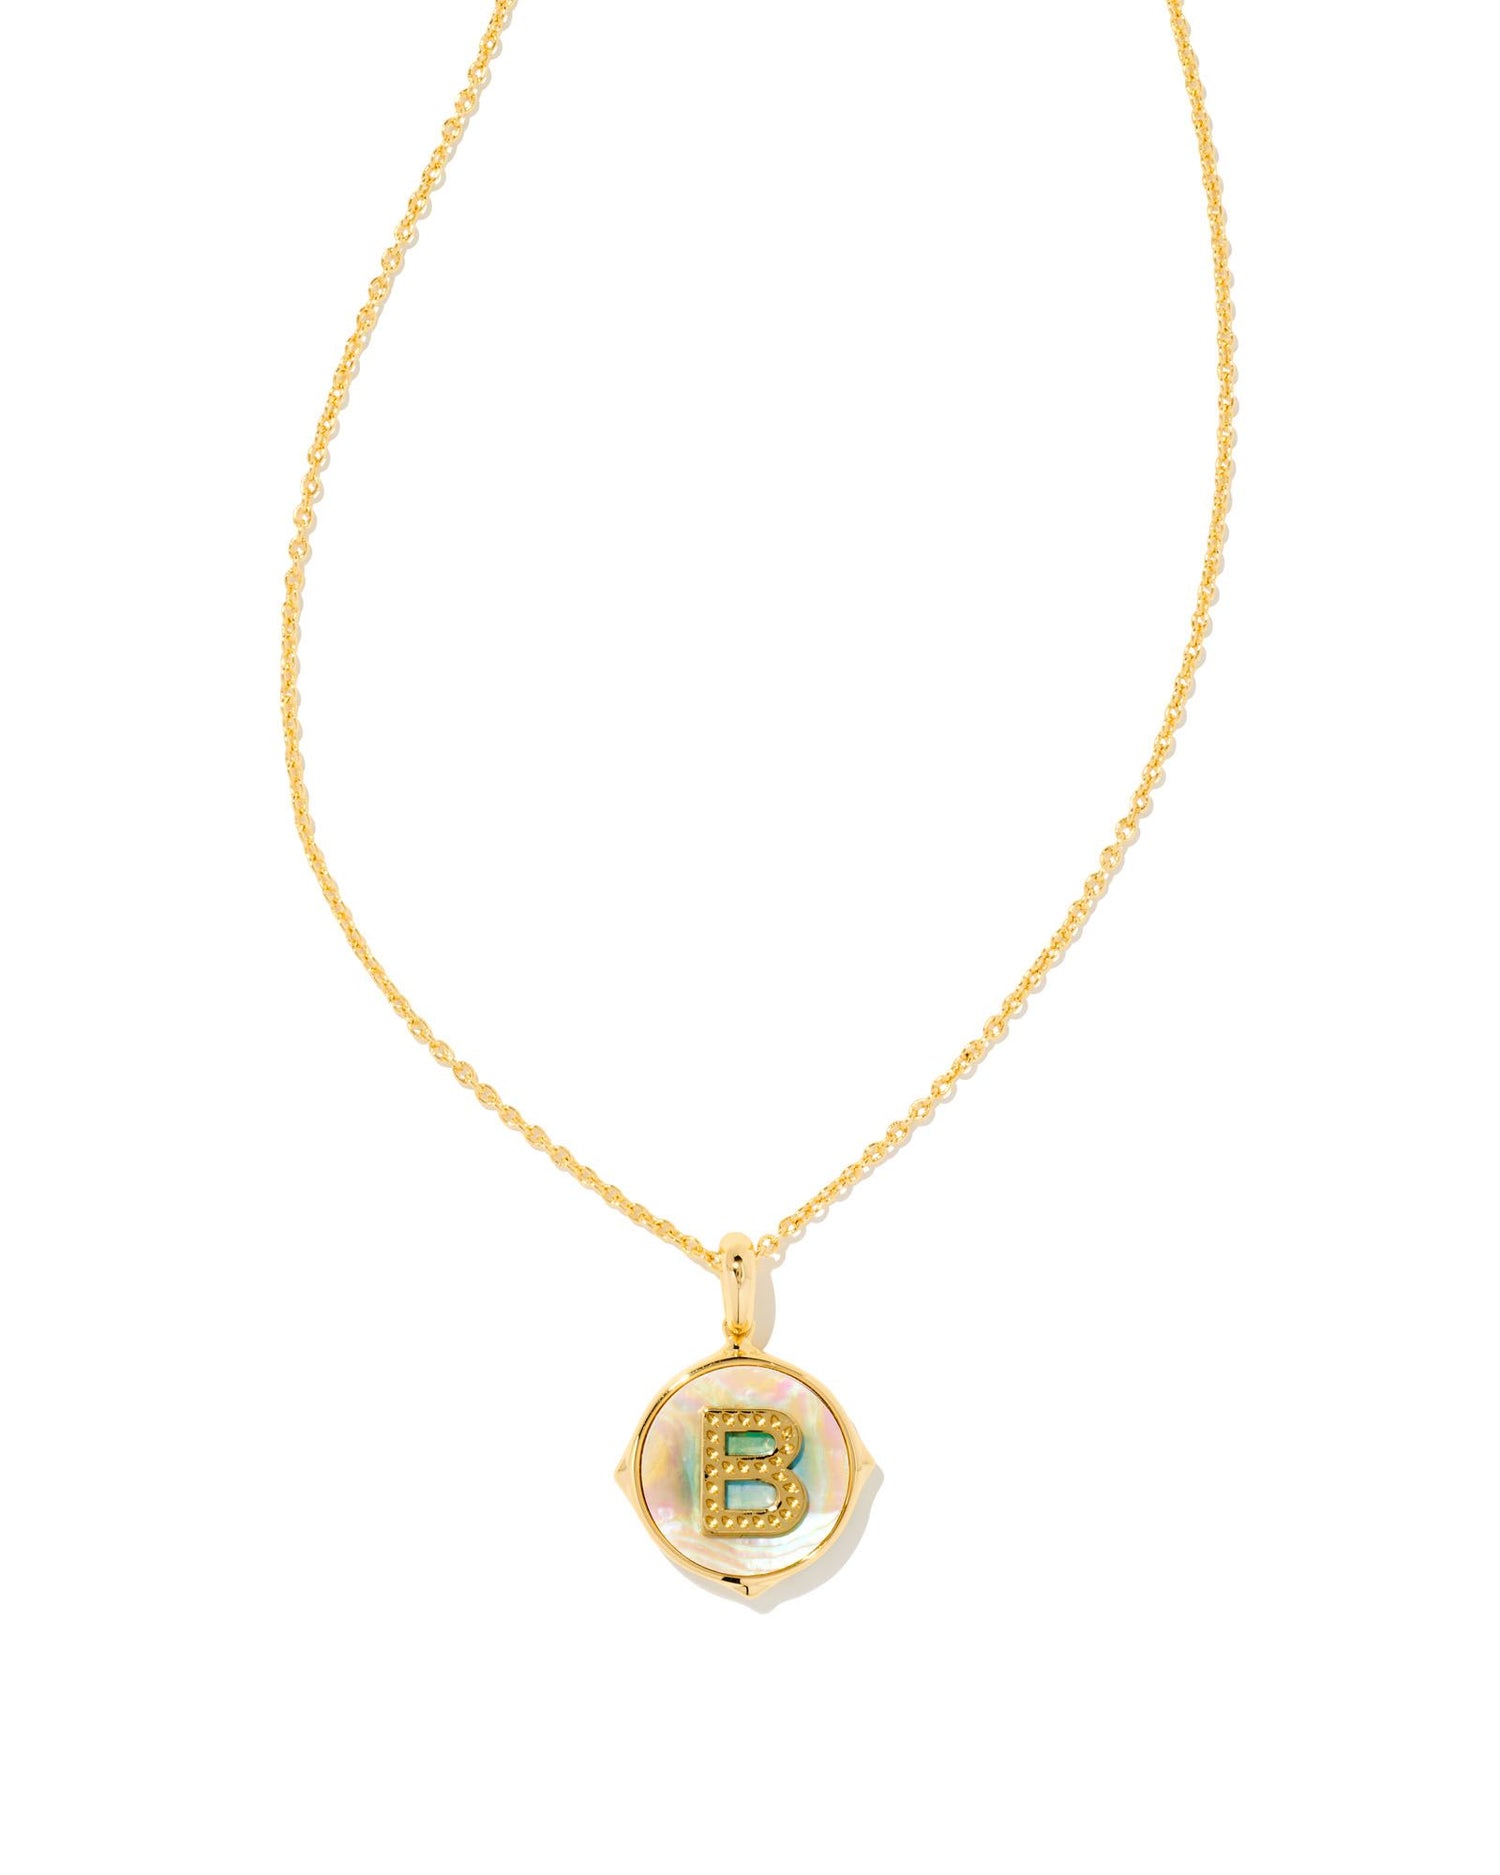 The Disc Pendant Necklace in Iridescent Abalone is a must-have layer. Featuring a reversible pendant, this versatile necklace is designed to personalize your look and double your styling options. Dimensions 16' CHAIN WITH 3' EXTENDER, 0.97'L X 0.71'W PENDANT